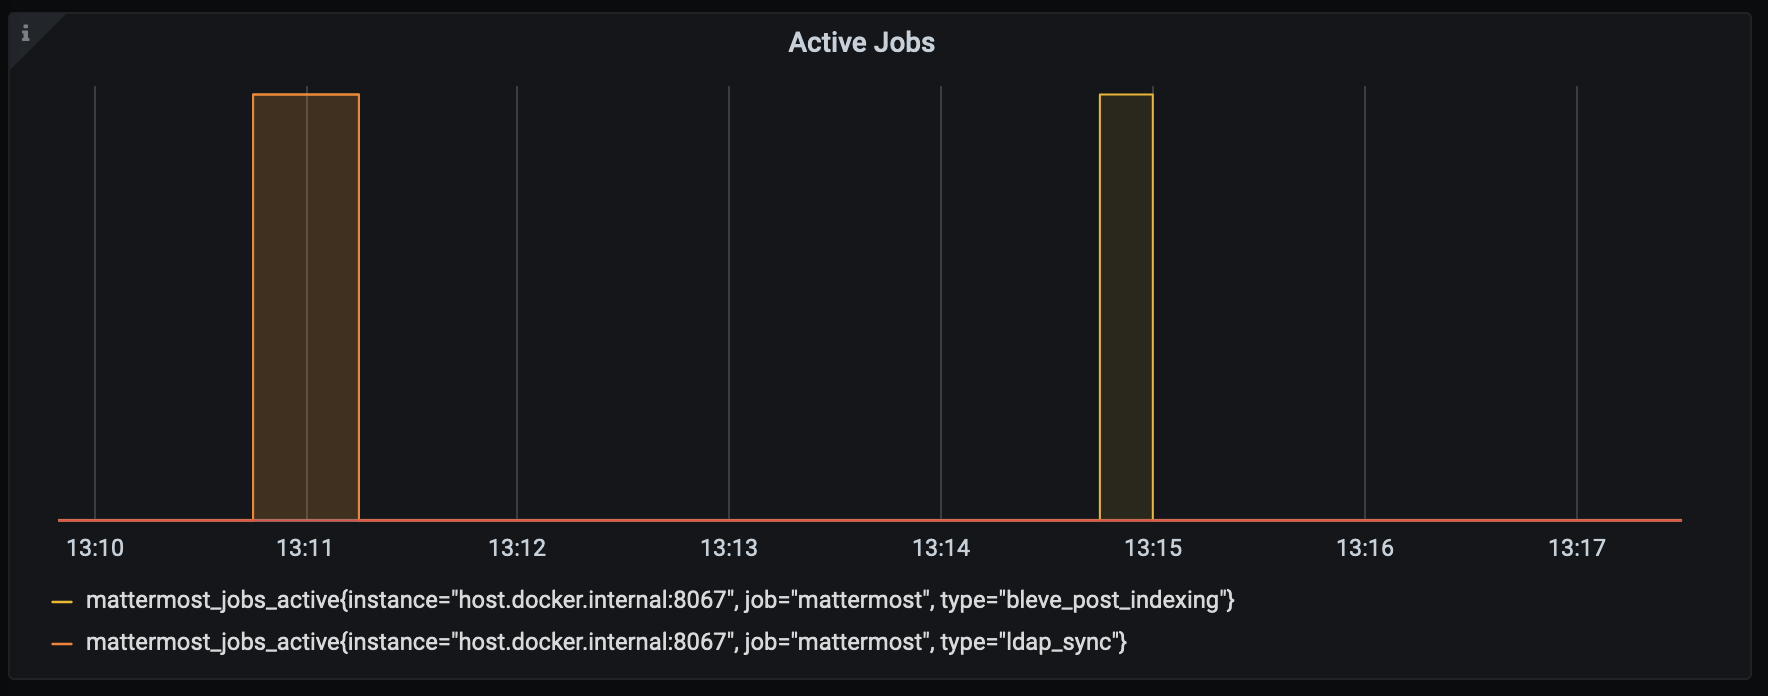 Example debugging metrics, including active jobs, in a self-hosted Mattermost deployment.